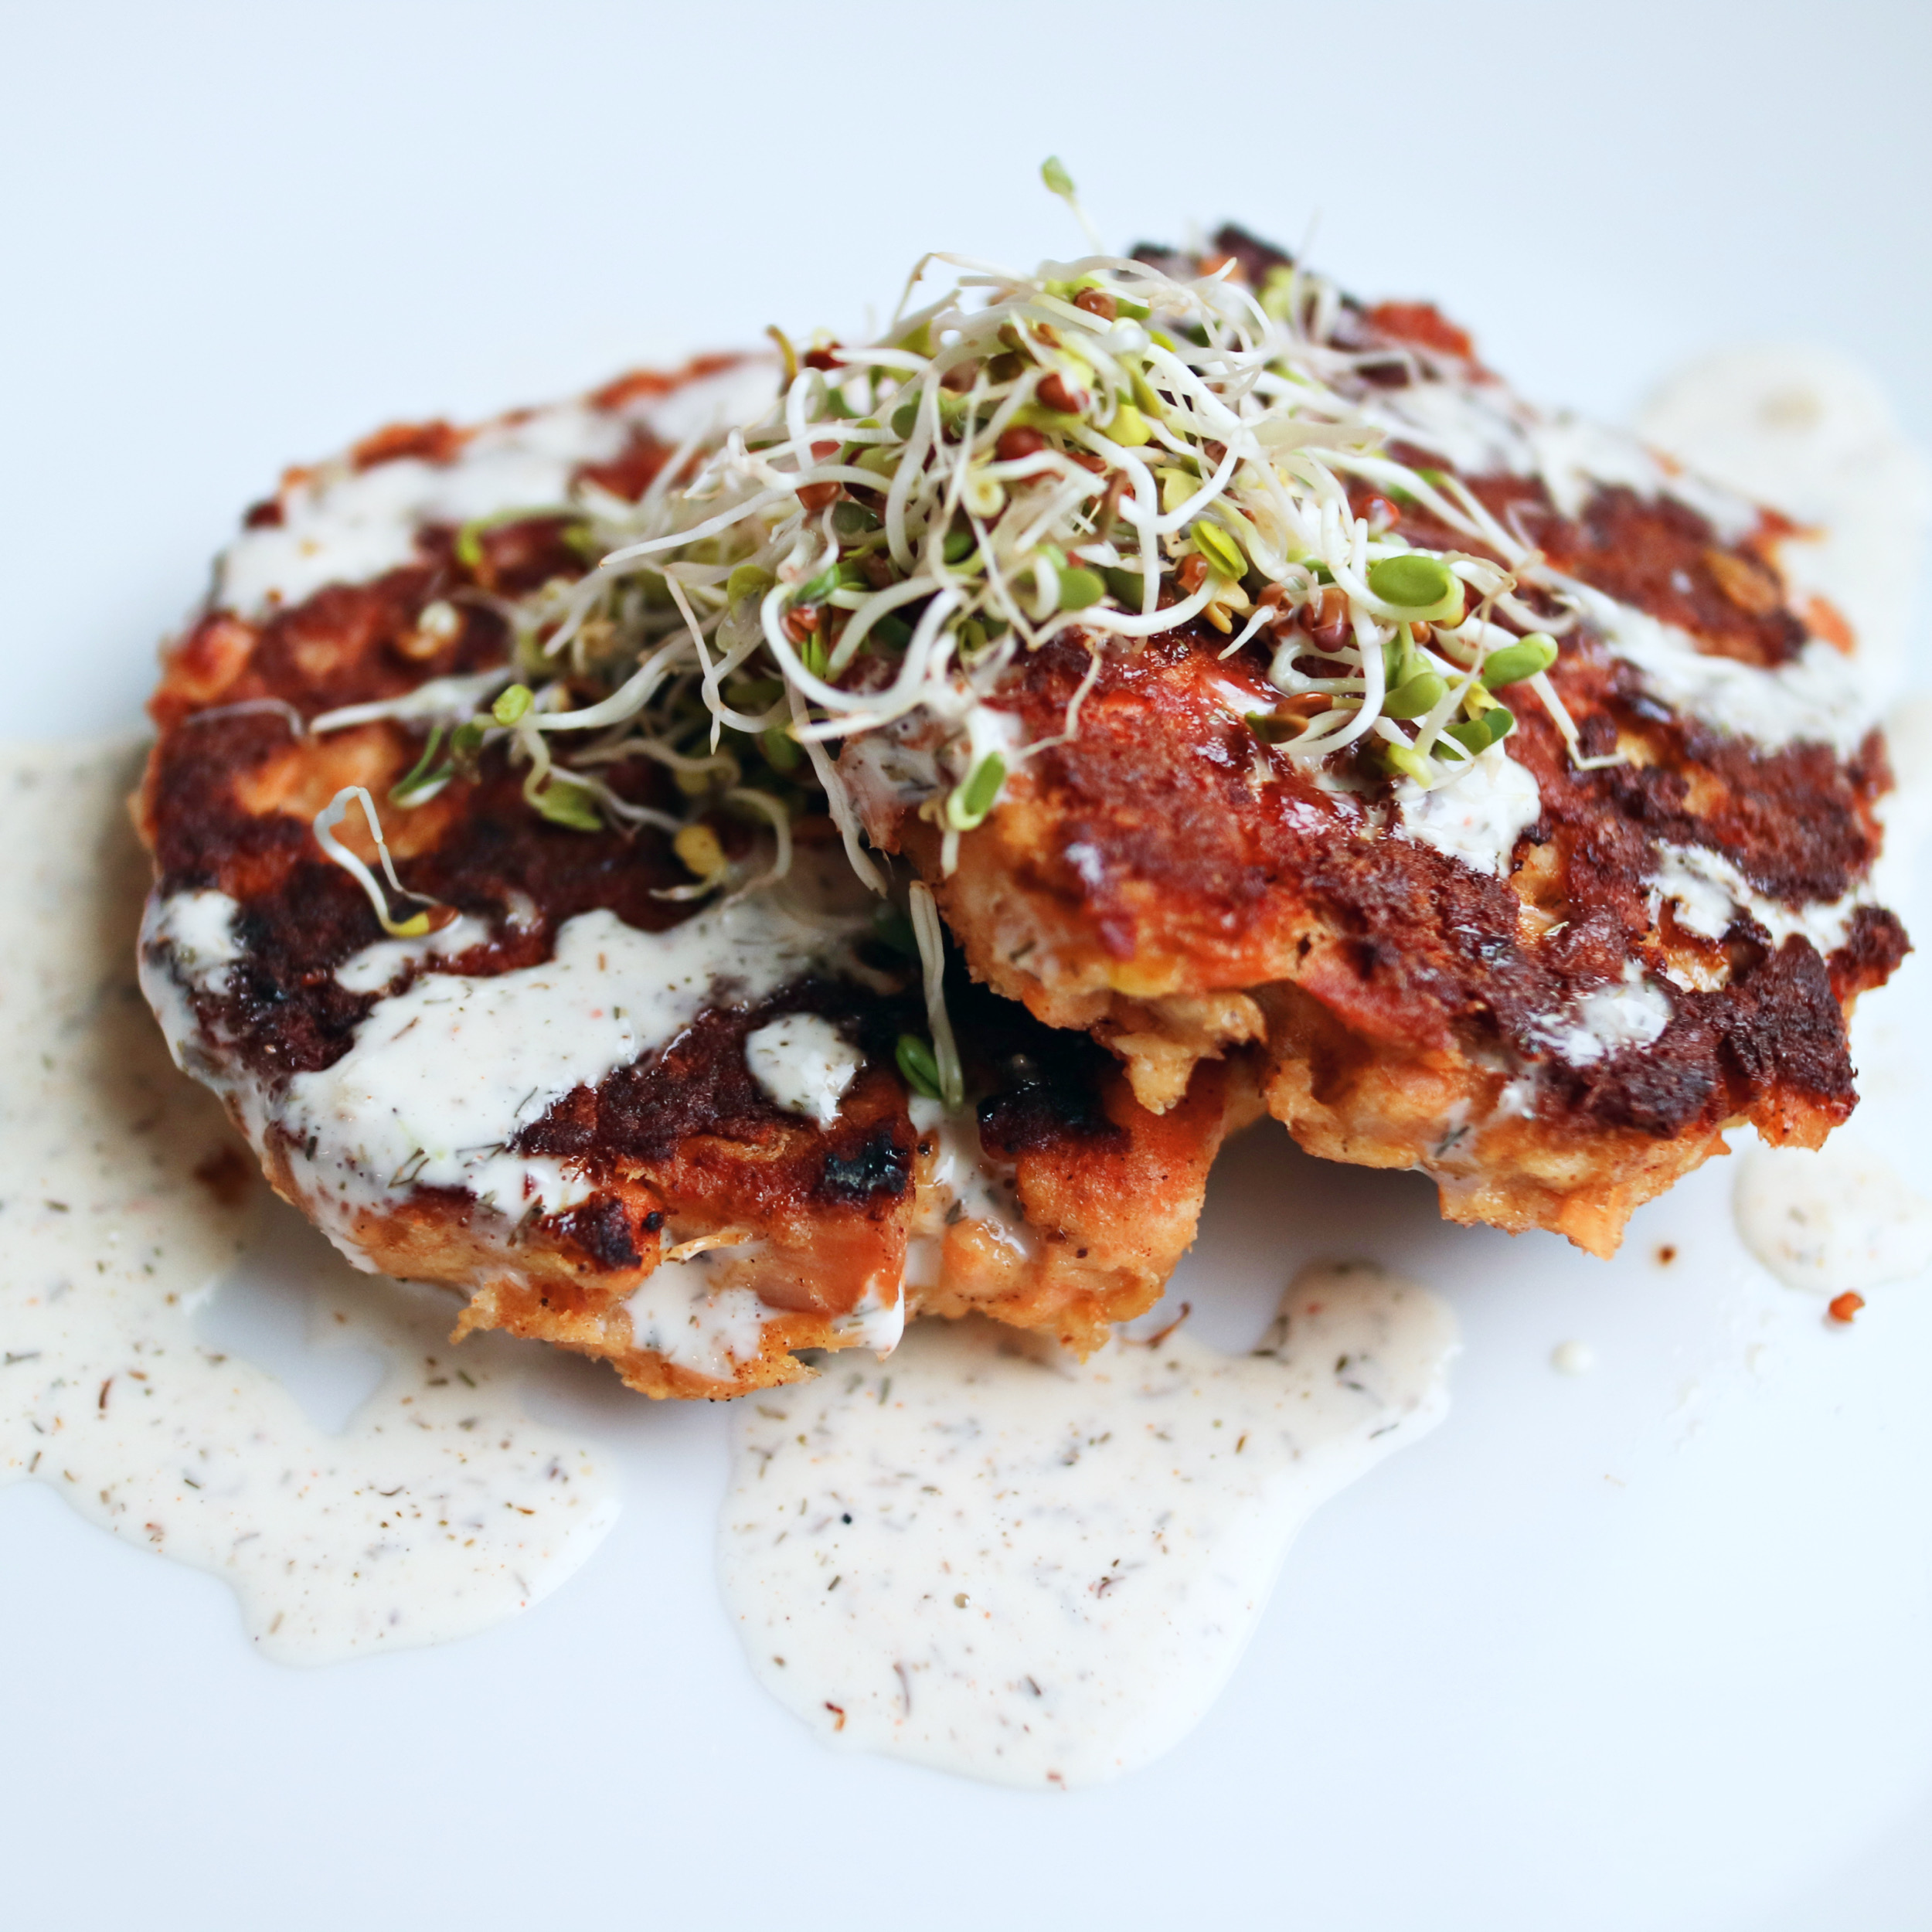 Salmon cakes with creamy dill sauce, made with canned or fresh salmon